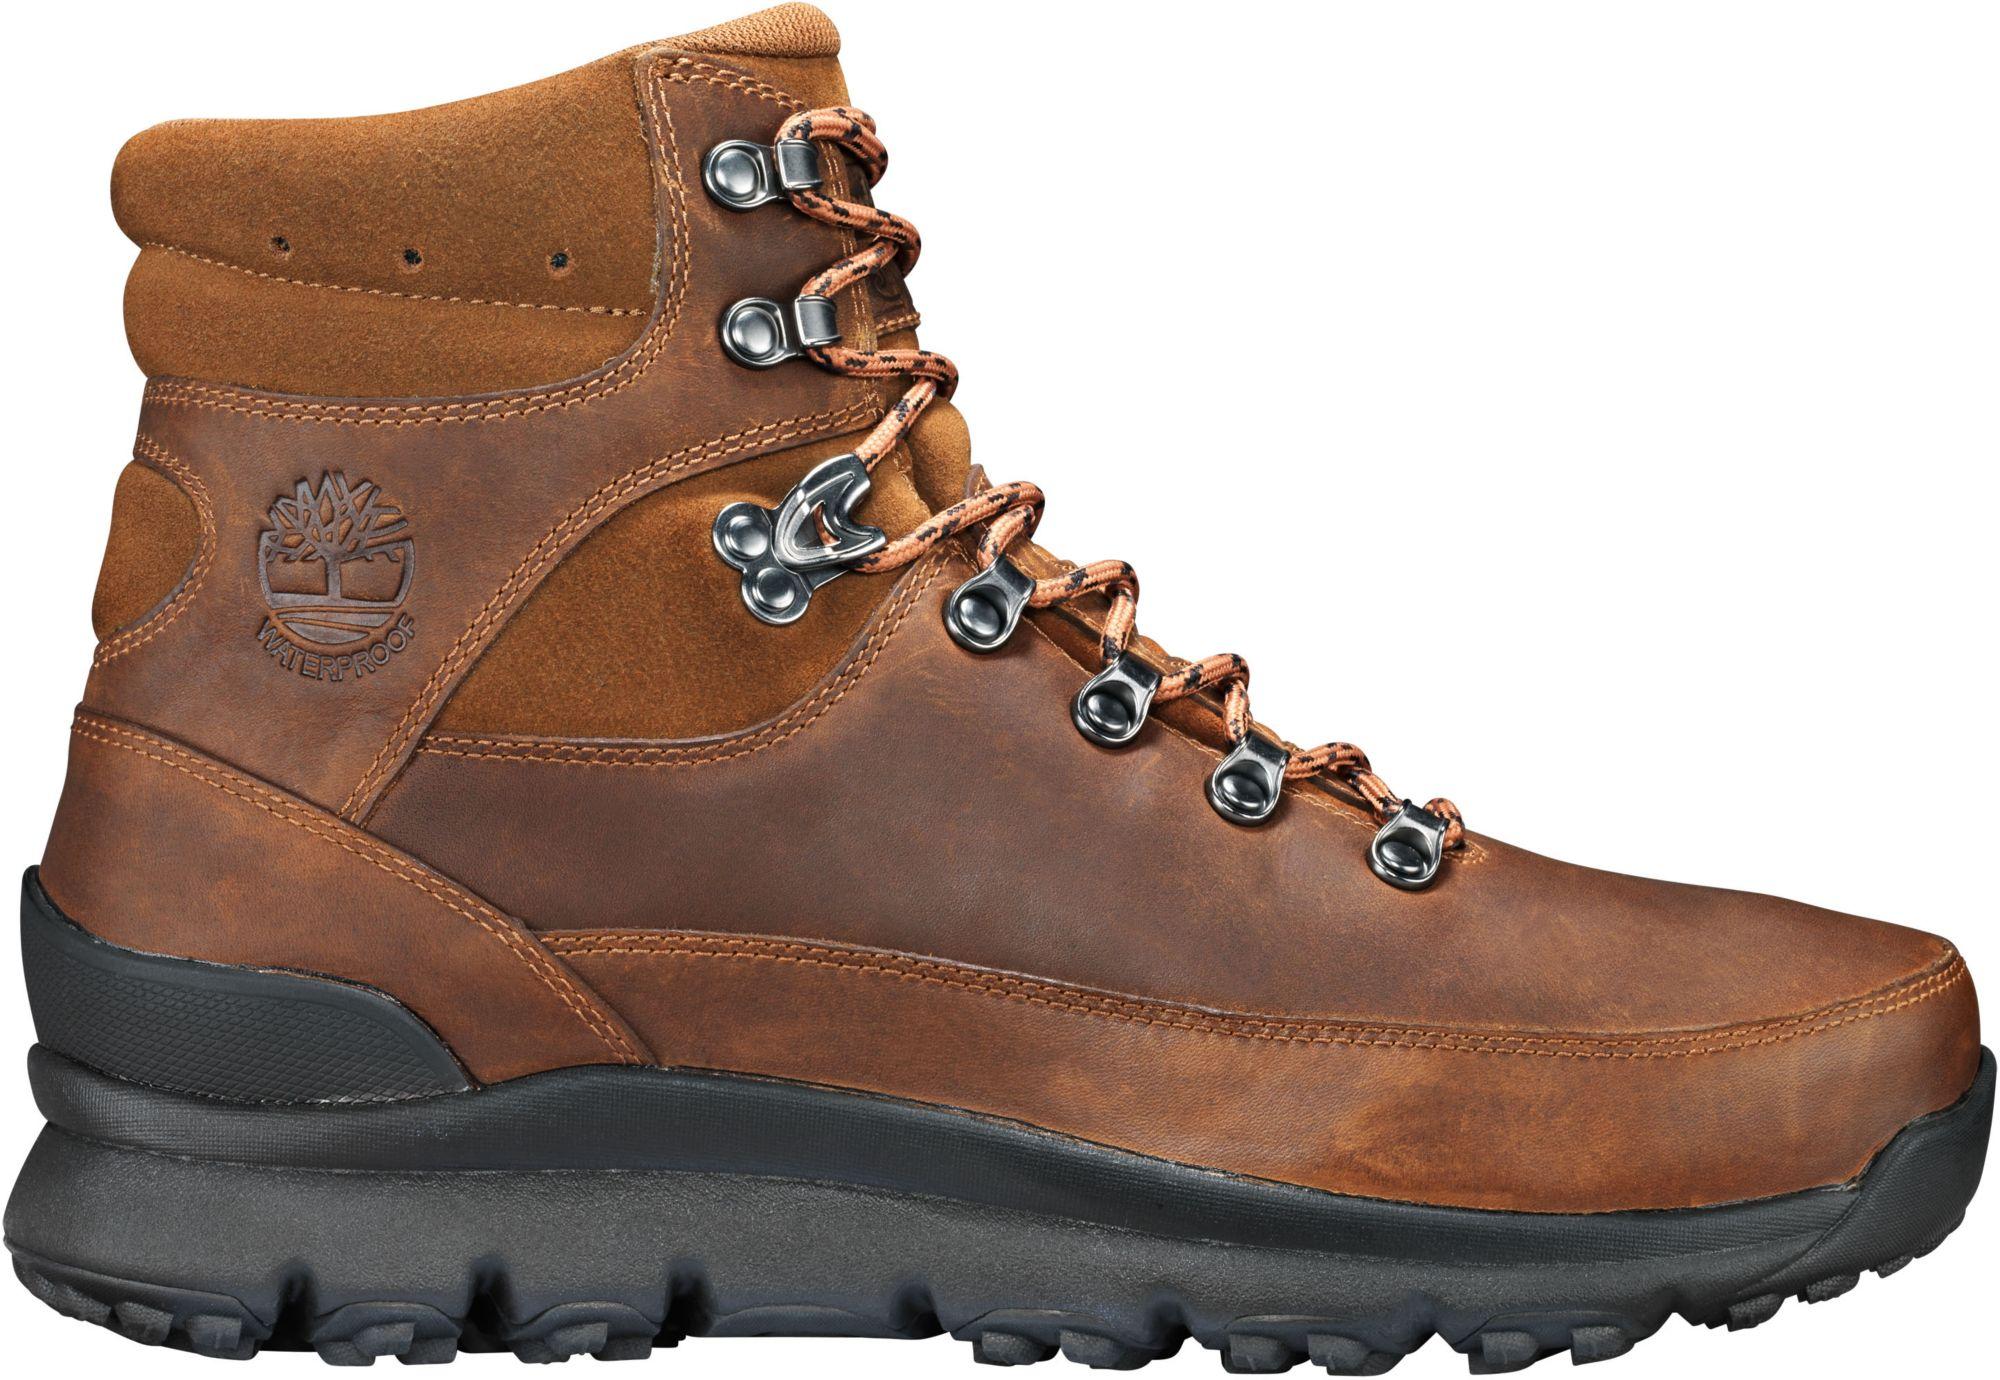 Timberland World Hiker Mid Waterproof Hiking Boots in ...